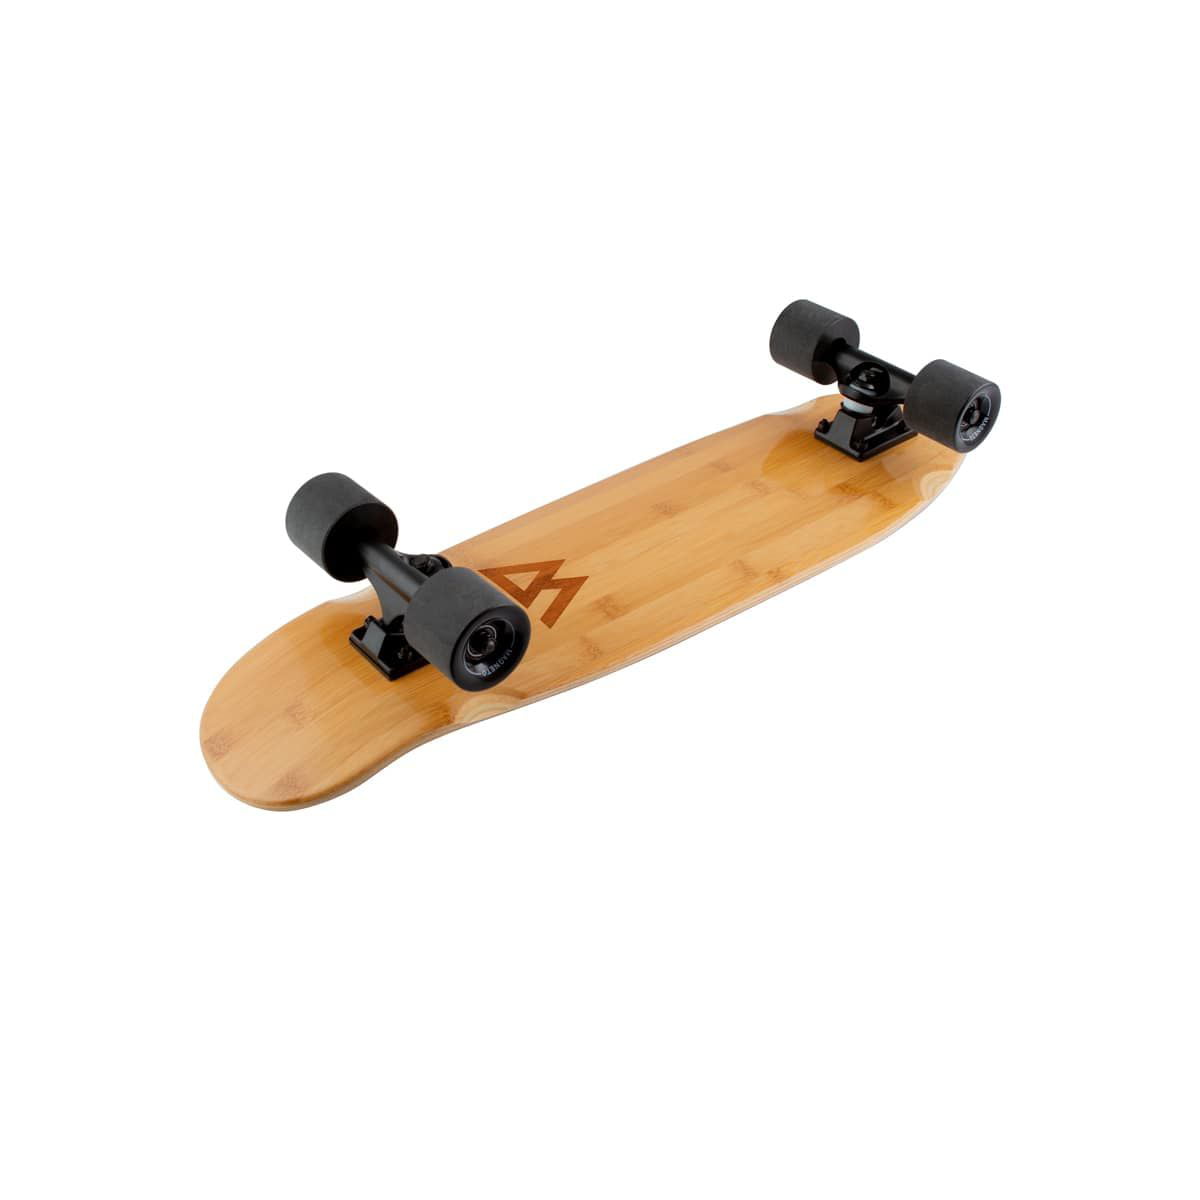 Magneto Boards Mini Cruiser Skateboard Cruiser Short Board Canadian Maple  Deck - Designed for Kids, Teens and Adults (Bamboo)